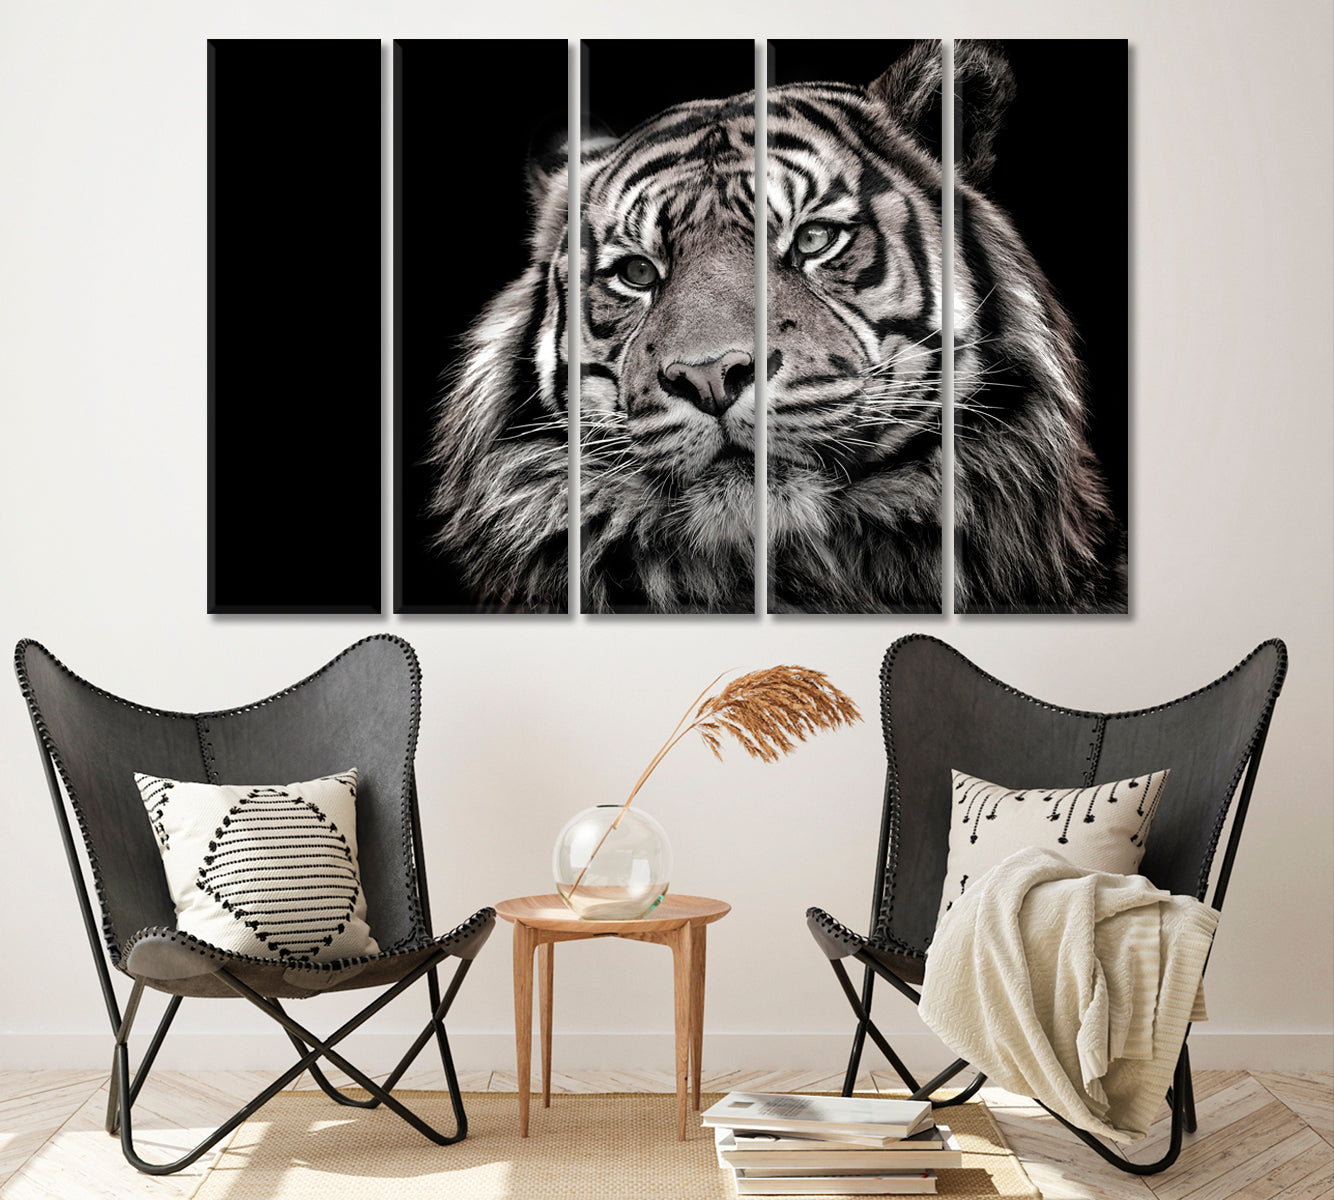 Black and White Tiger Portrait Canvas Print ArtLexy 5 Panels 36"x24" inches 